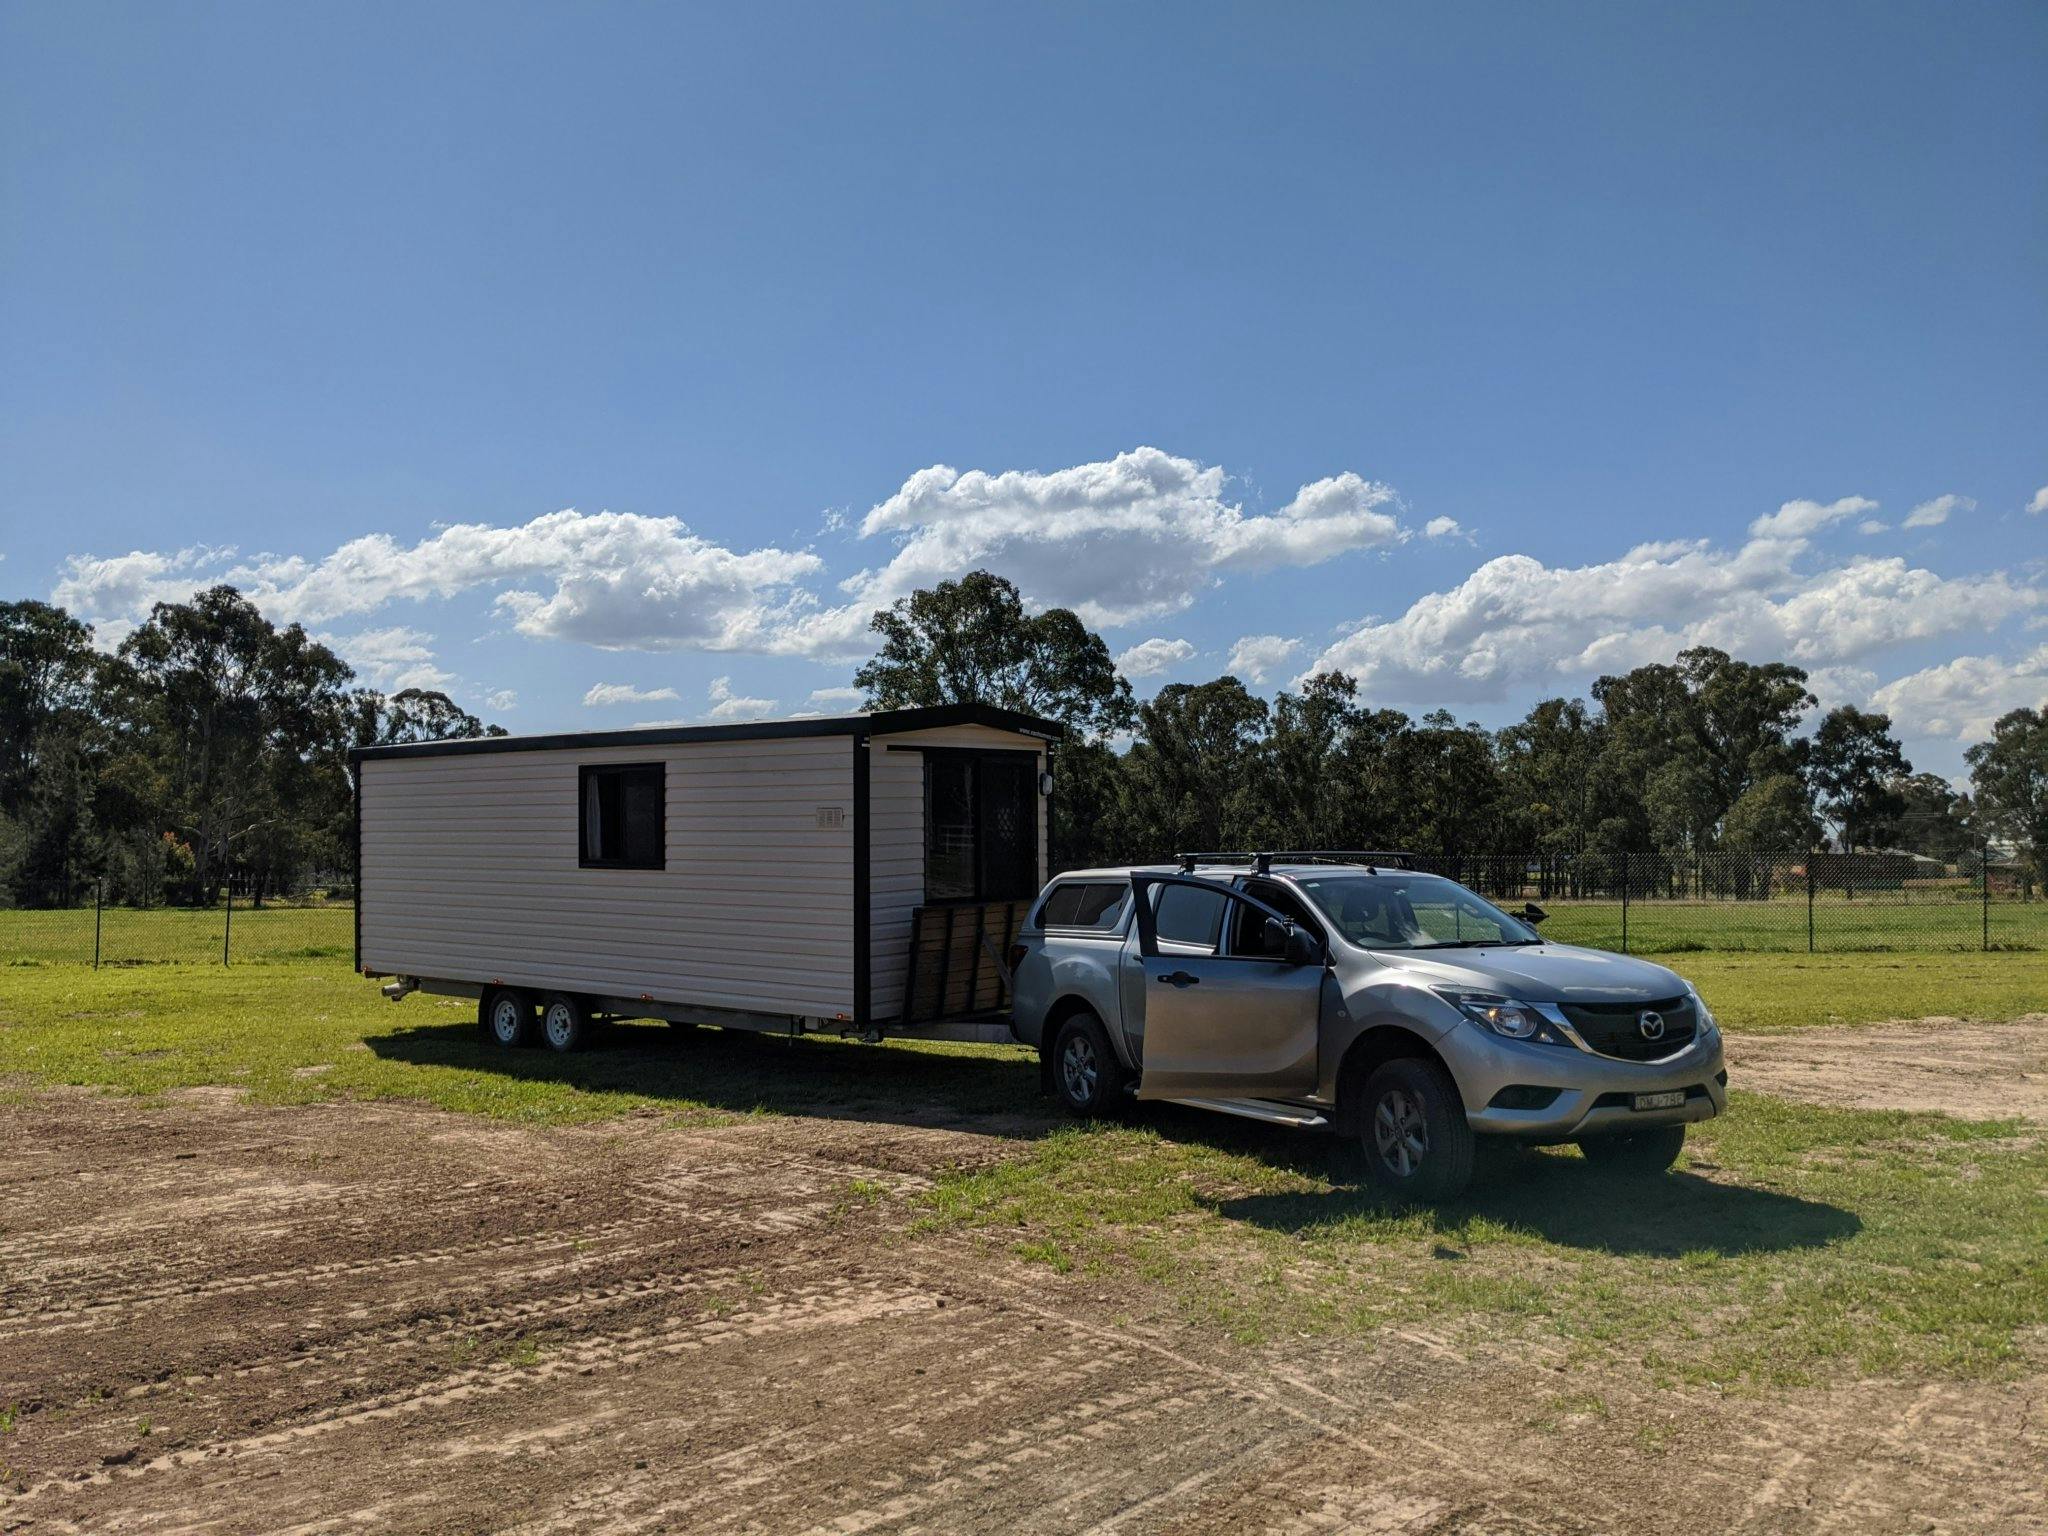 7.8x2.4m Studio Vanhome being transported to new location